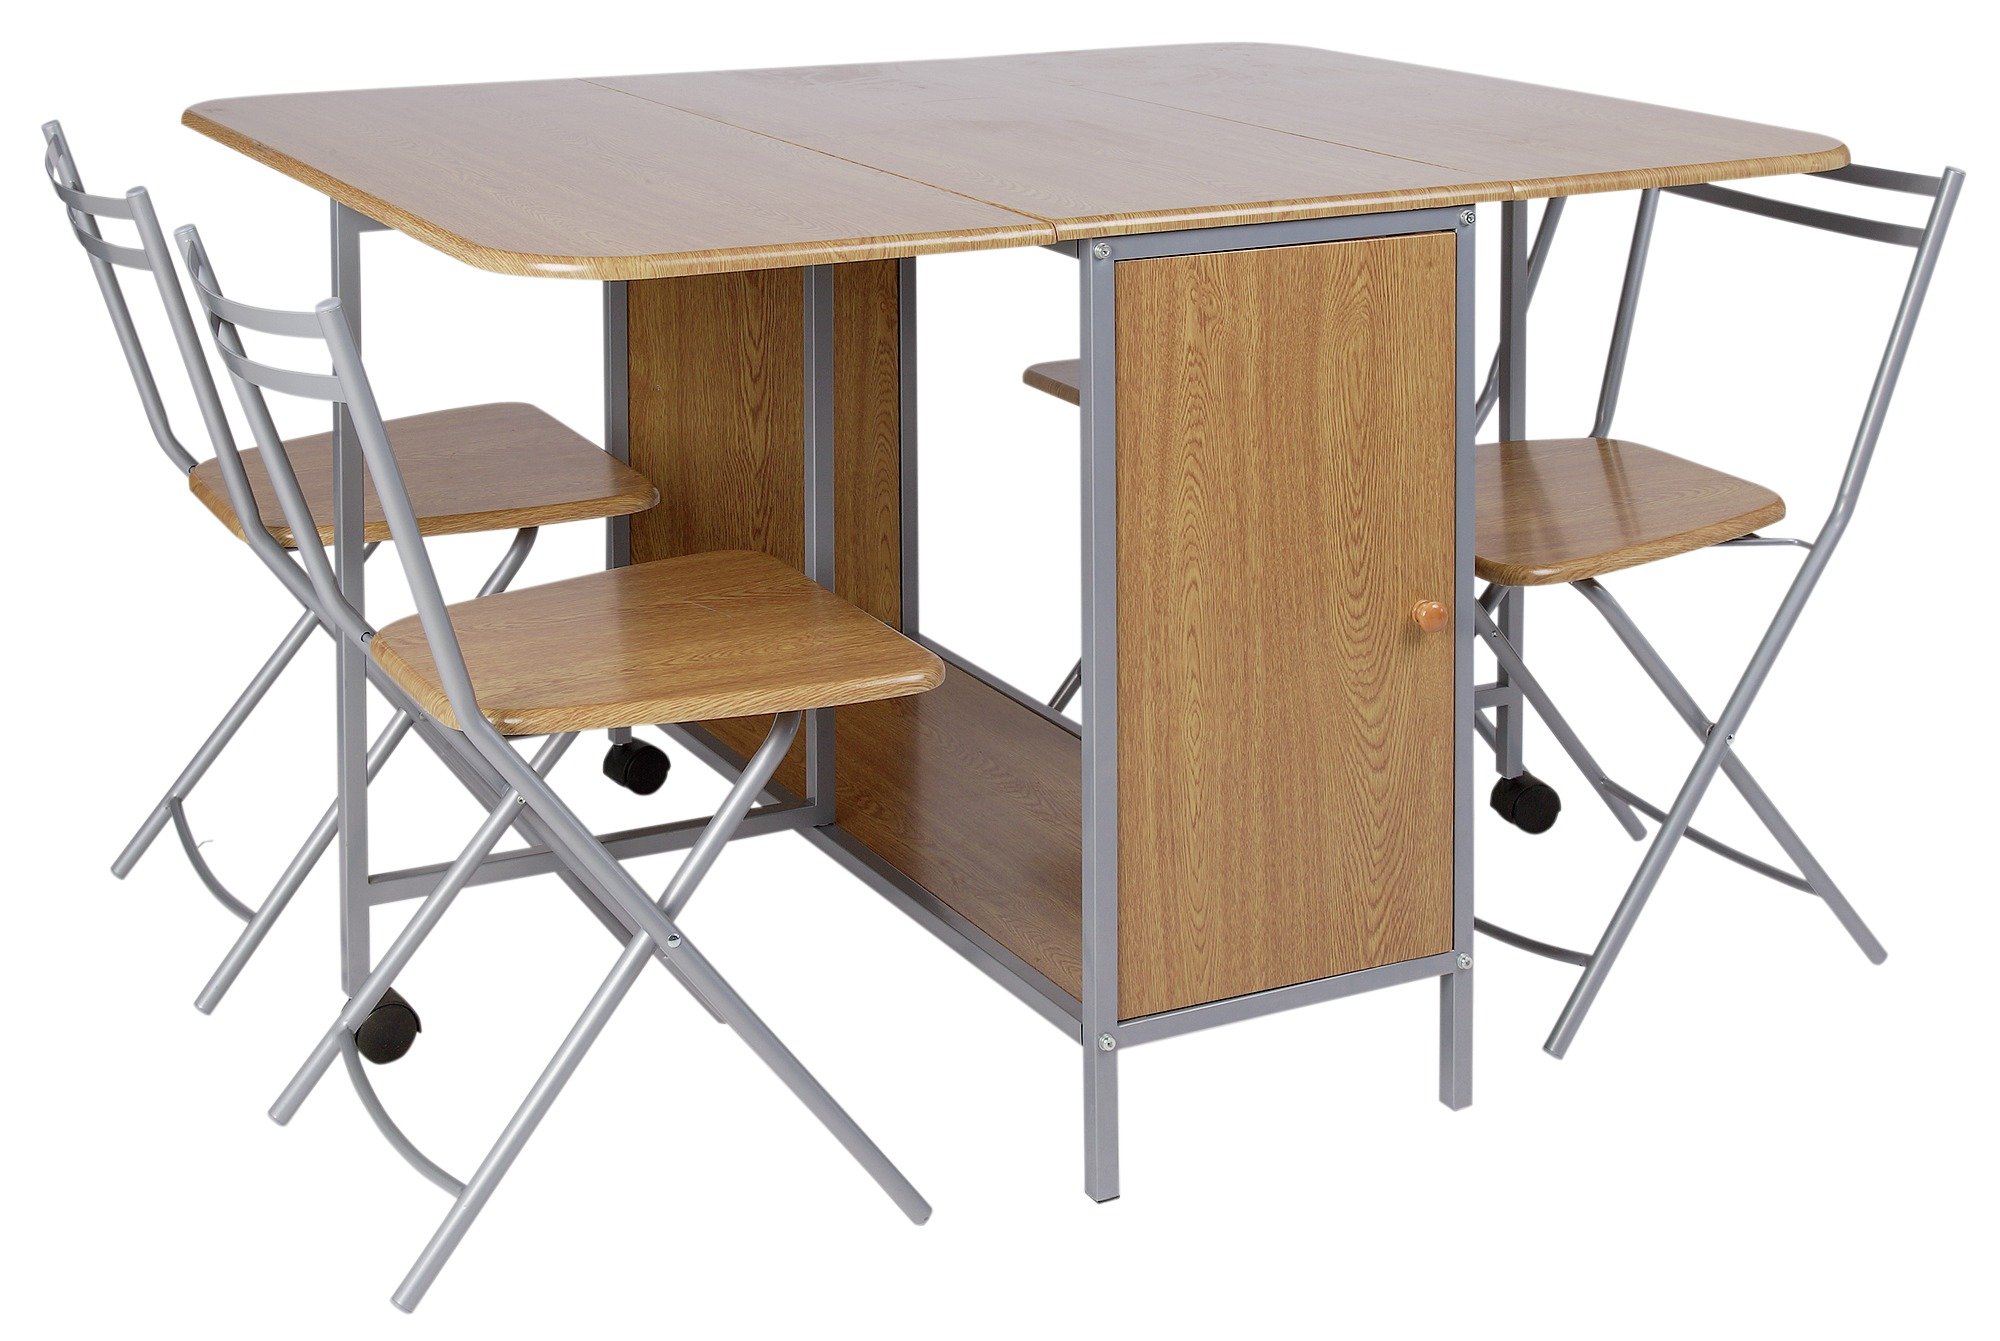 Argos Home Ext Rectangular Dining Table & 4 Folding Chairs review